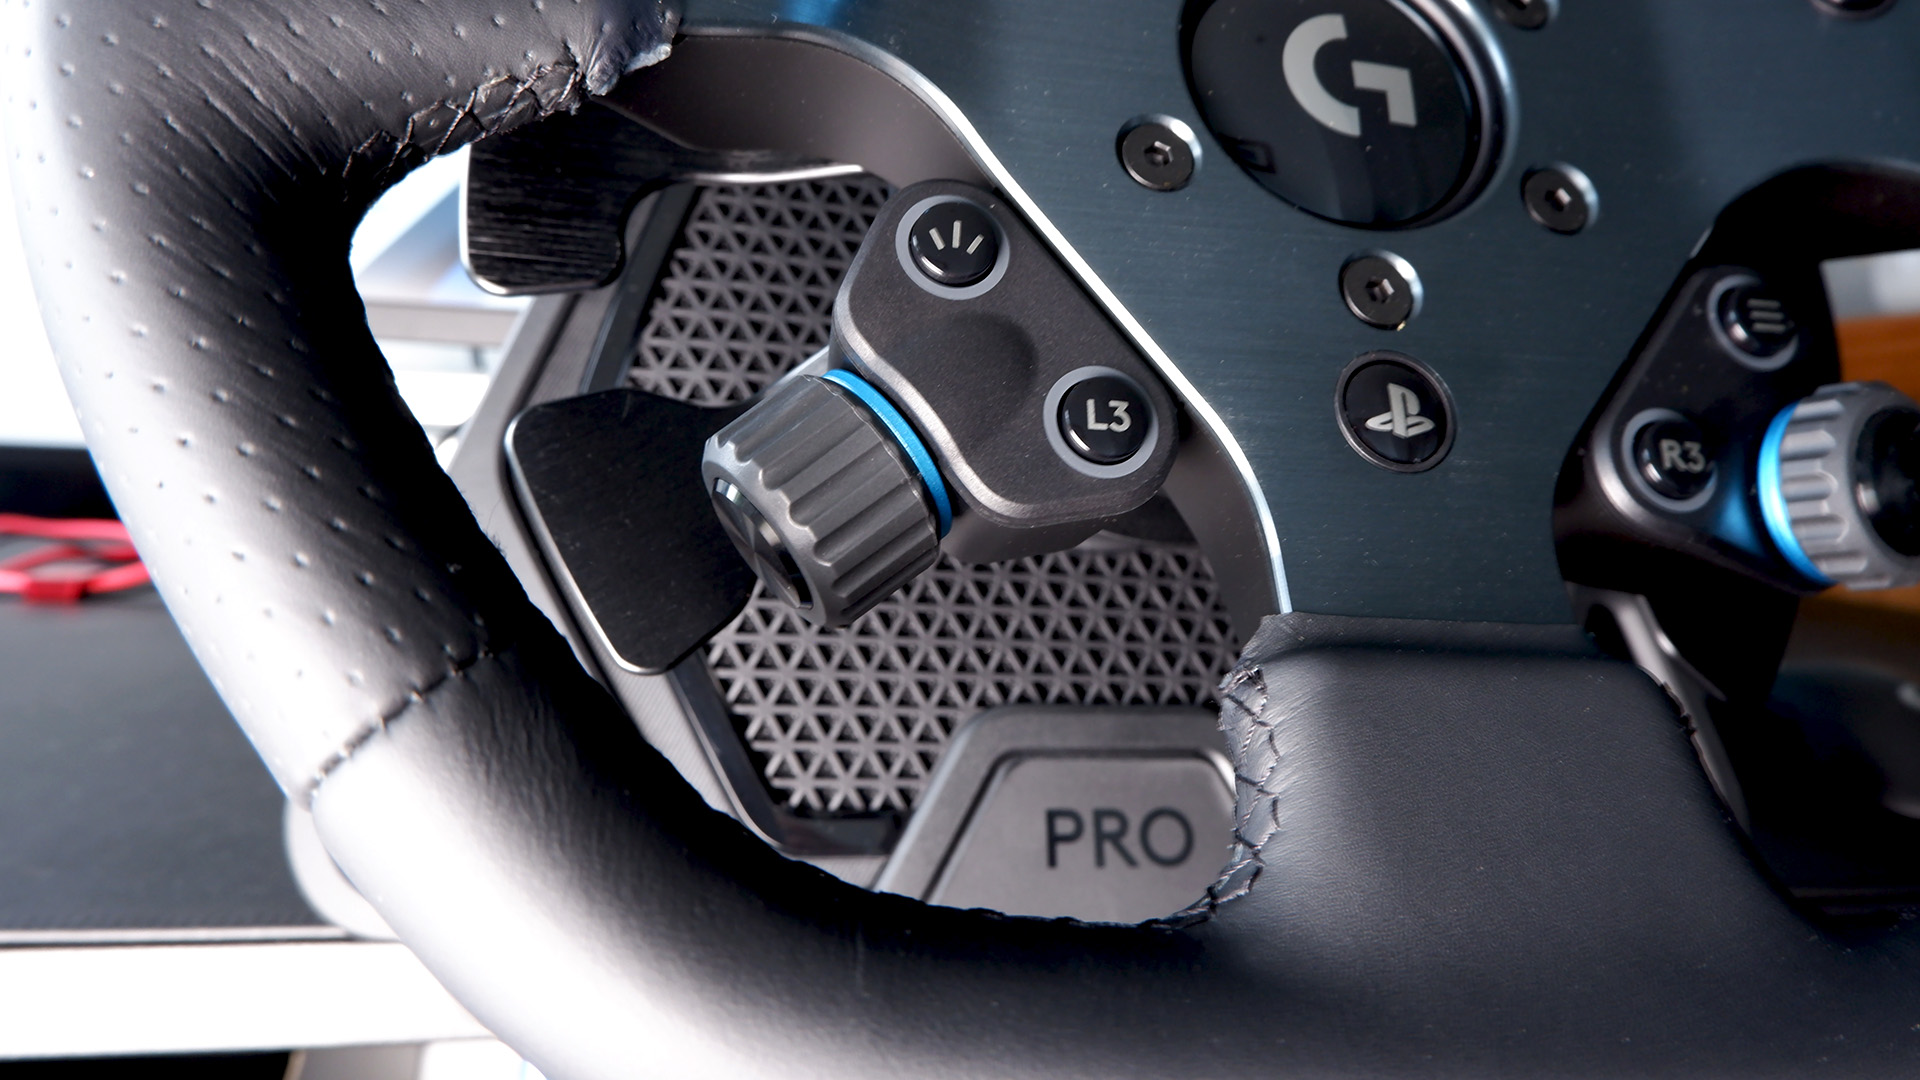 Logitech G Pro Racing Wheel and Pedals installed on a computer desk